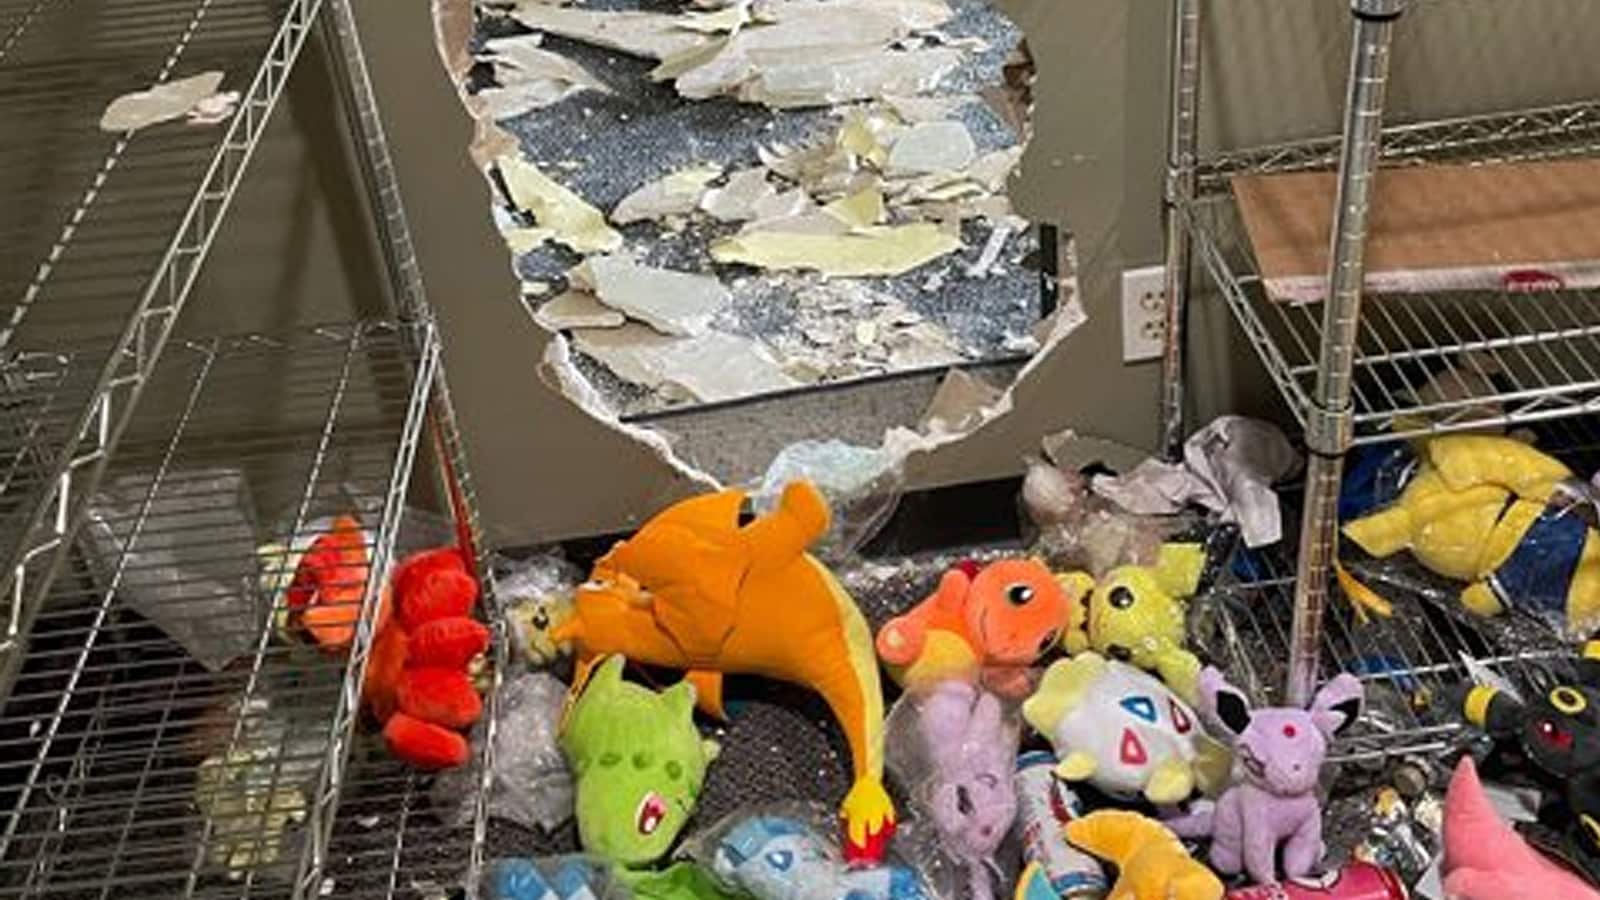 Twitter user mcguirereports image of thieves smashing through shop wall to steal Pokemon cards.